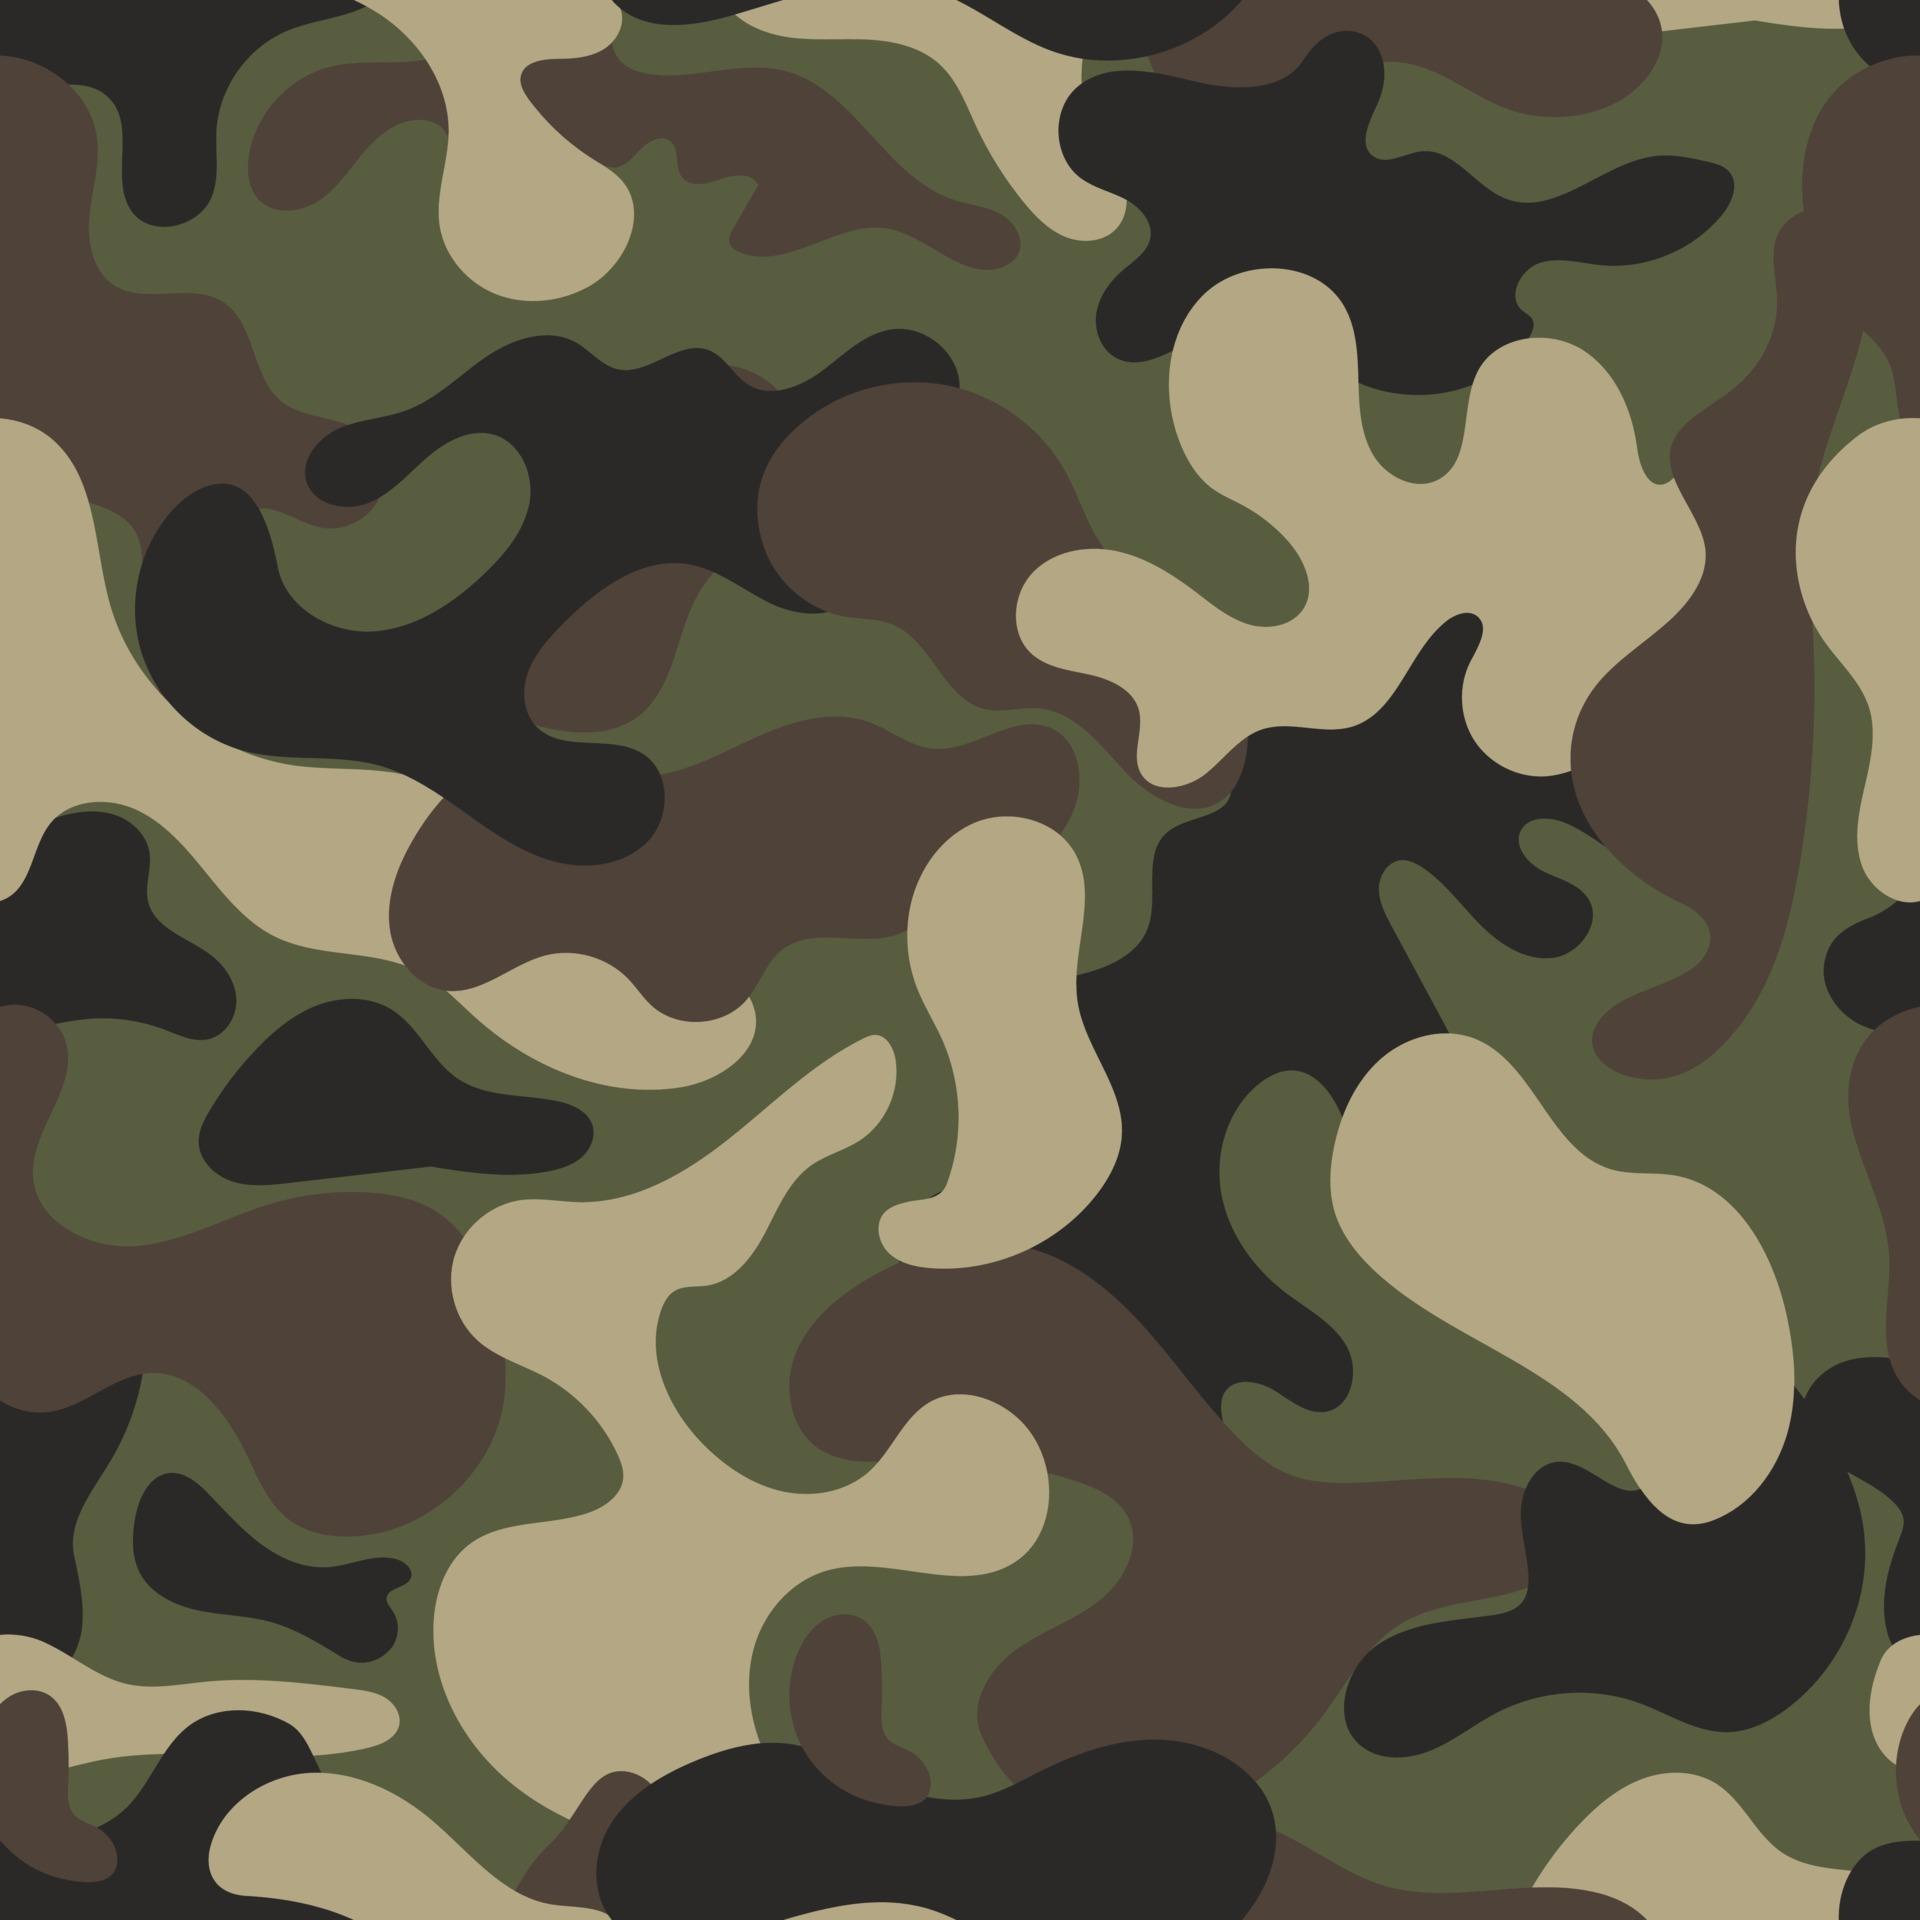 Camouflage background. Abstract camouflage. Colorful camouflage pattern